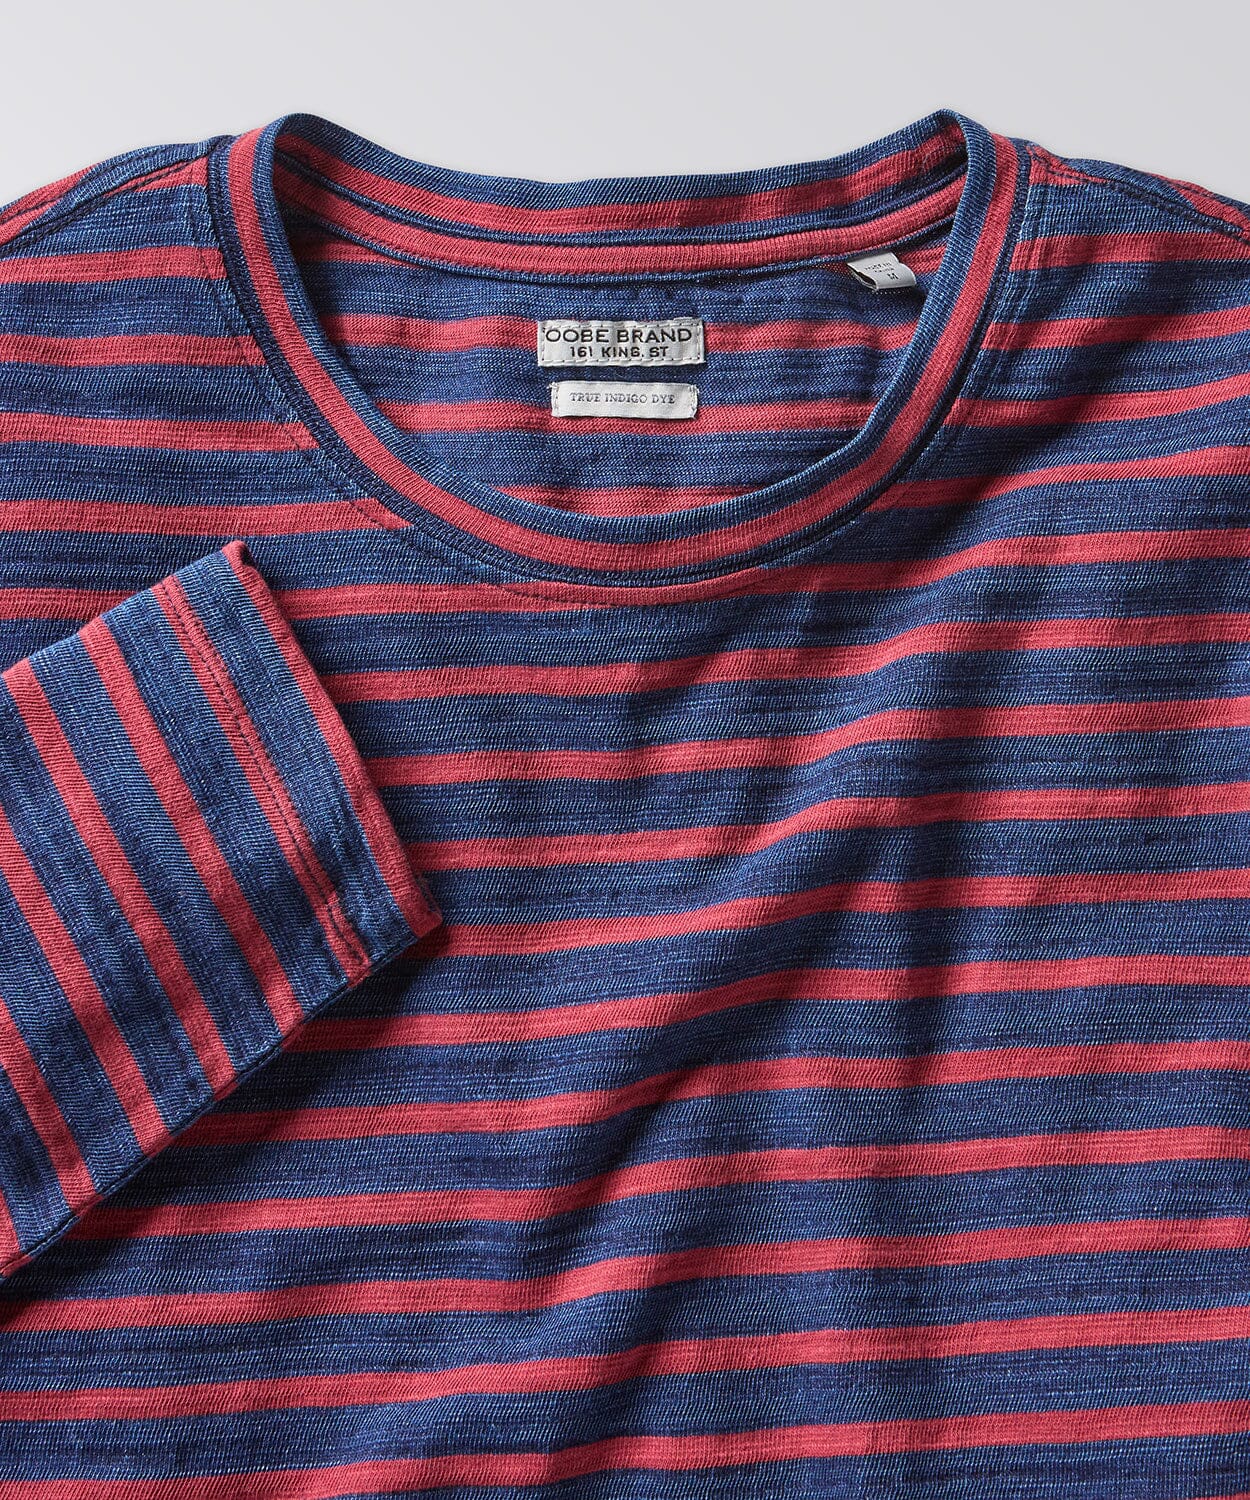 front of a mens striped tee